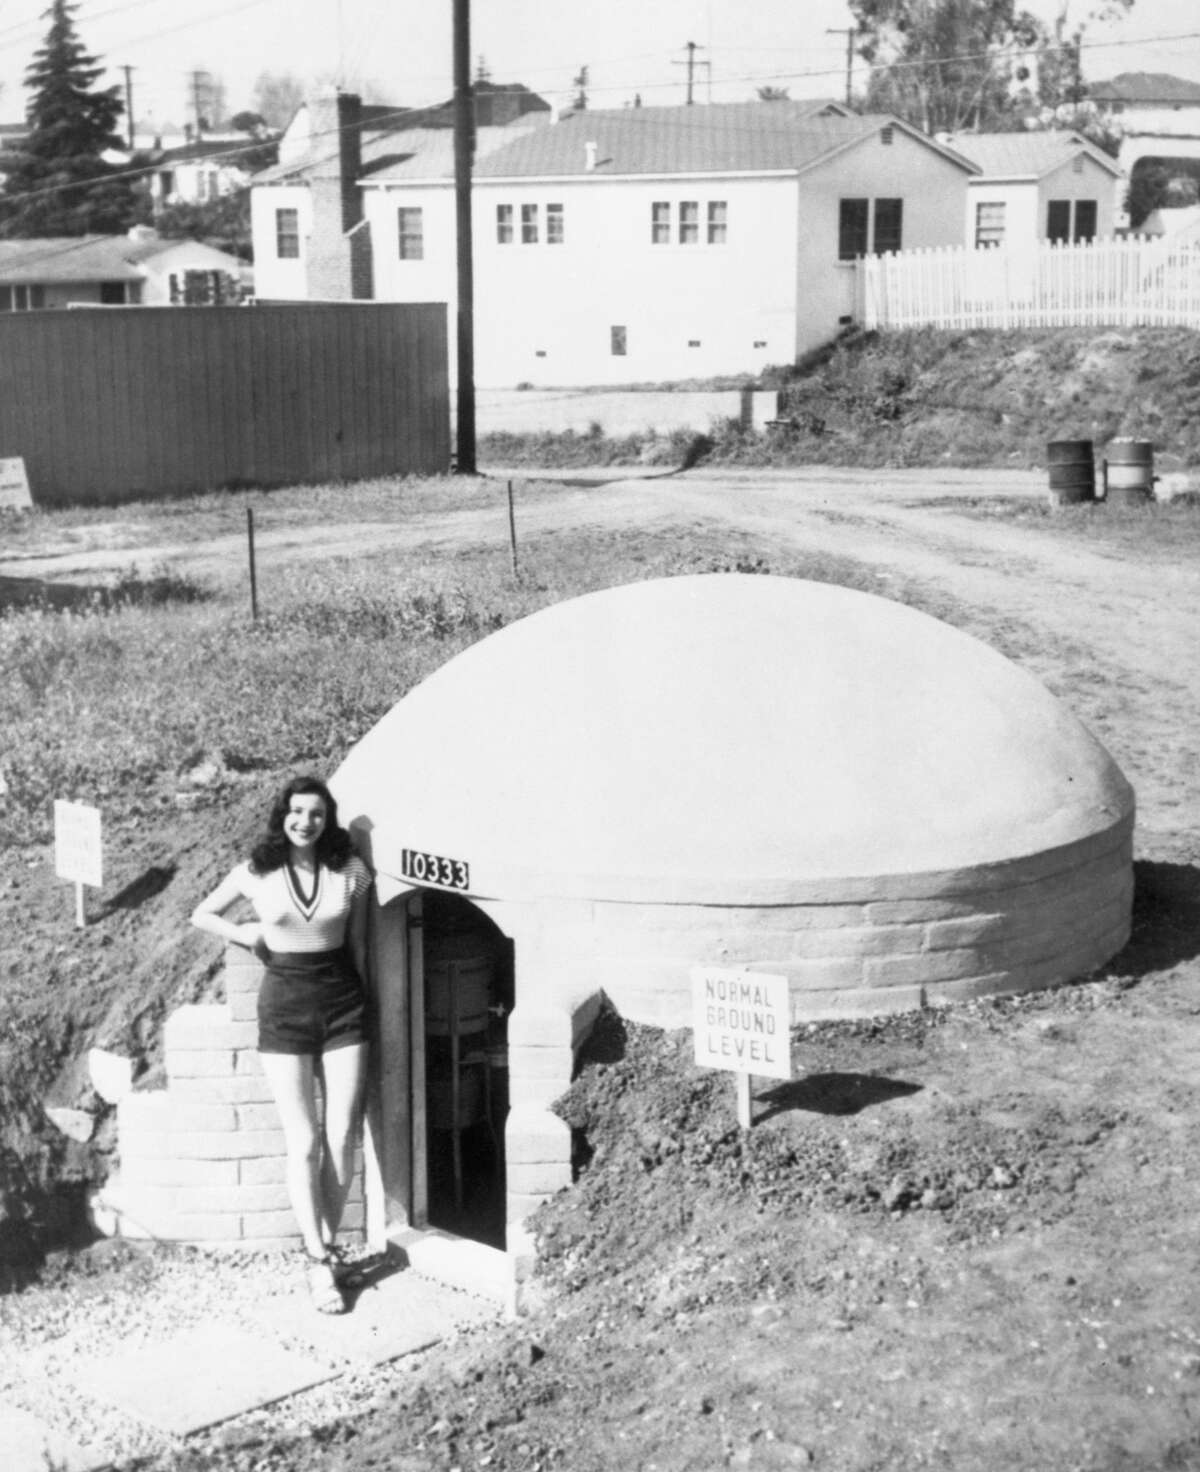 (2/26/1951-San Francisco) Original caption: This dome-shaped structure, the latest design in atomic bomb shelters, can be installed in your back yard for $1,250 [$13,400 in today's dollars]. When not in use as protection against aerial attack, the shelter doubles as utility room or guest house, so say the makers. Sleeping six comfortably, or 20 in an emergency, the 12 1/2-ton concrete house protects you from the elements with its 1 1/2-inch thick walls. Mary Lou Minor is shown modeling the model shelter.